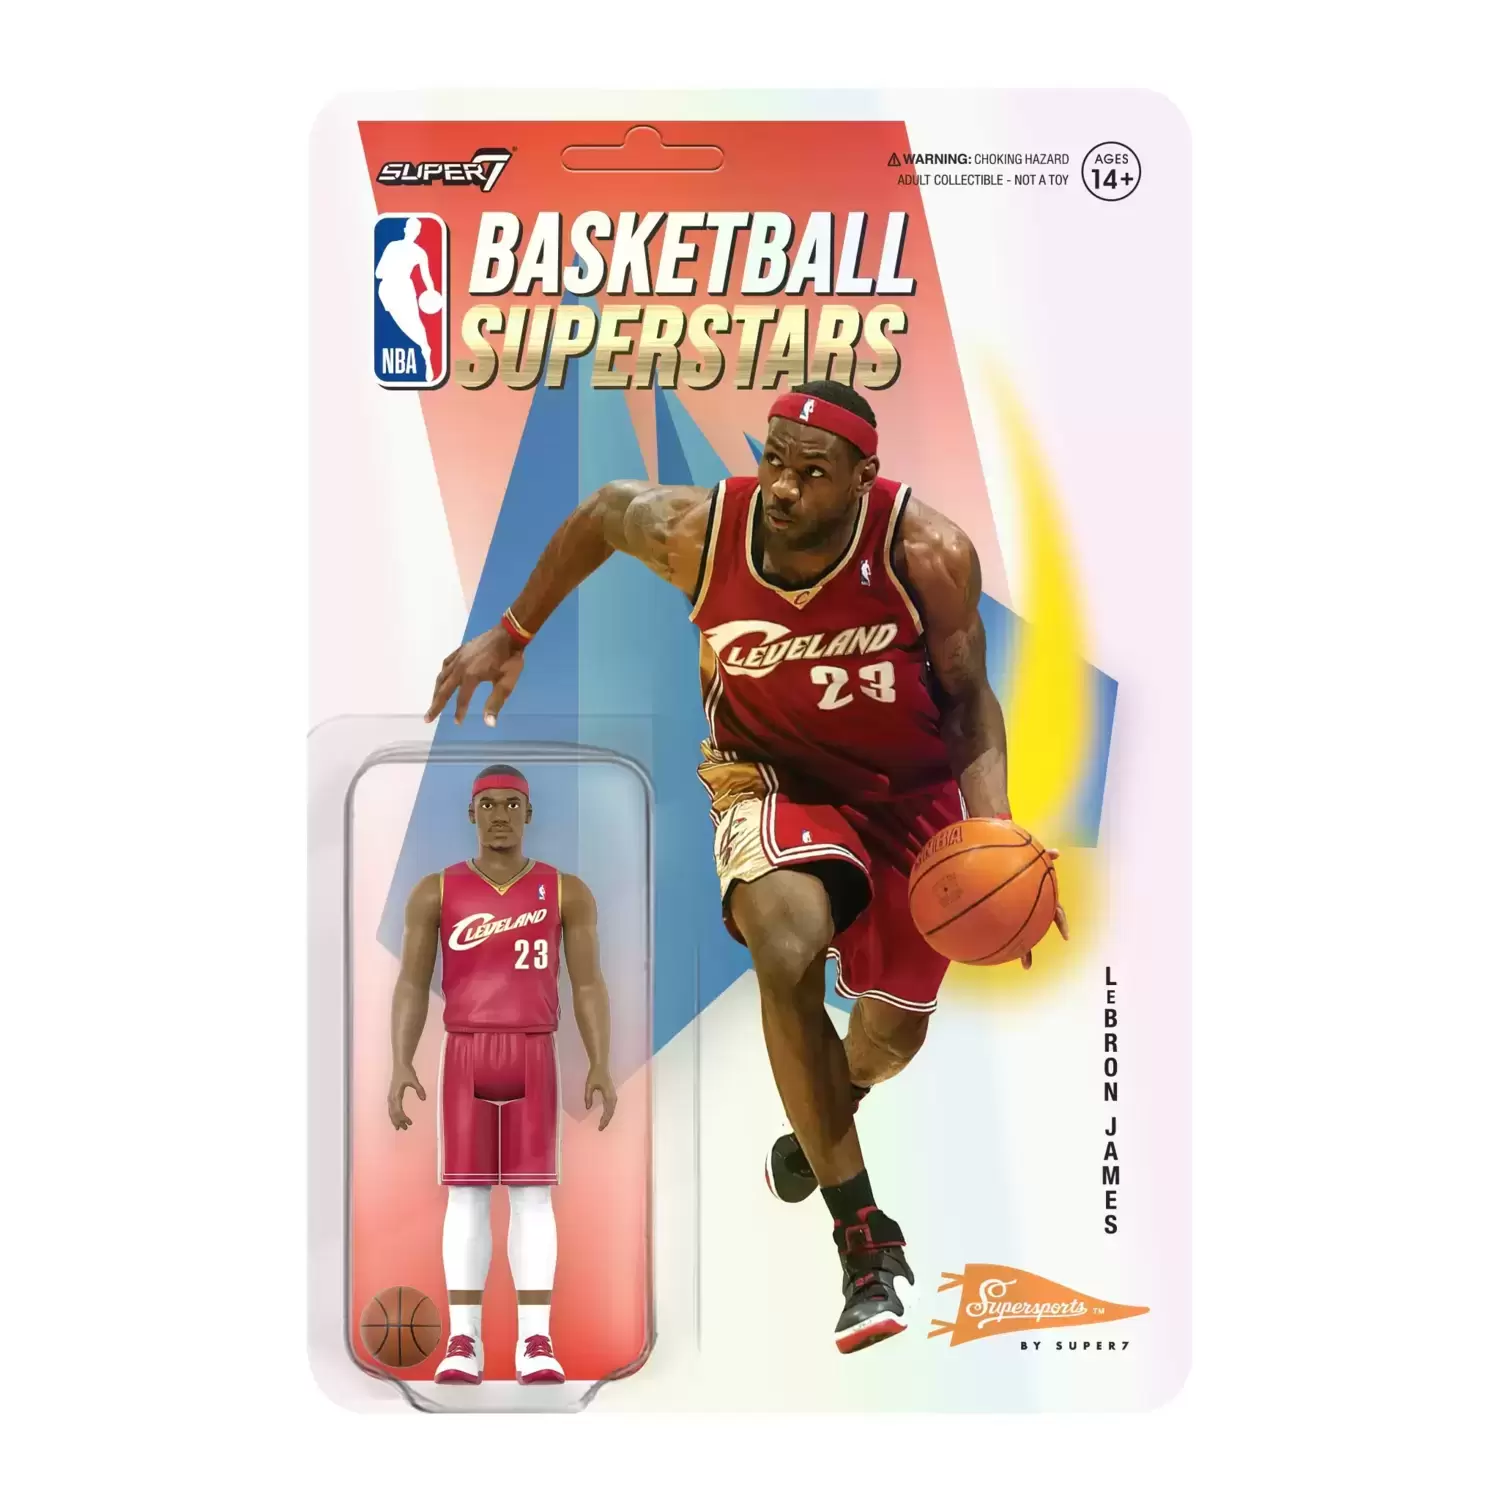 Supersports by Super7 - LeBron James (Cavaliers)